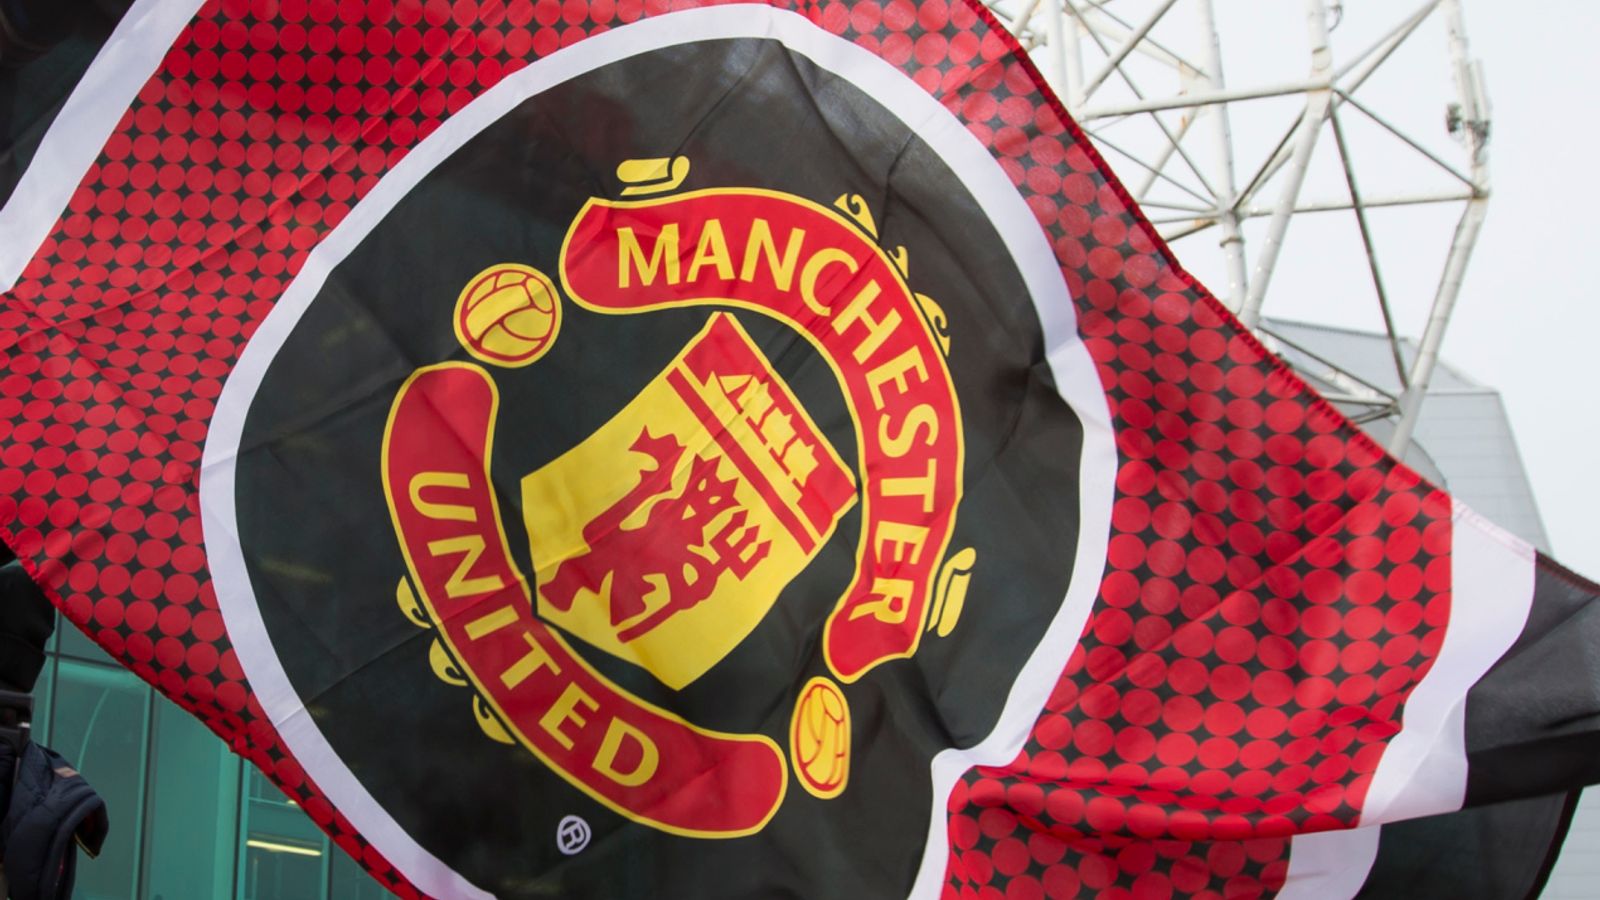 Manchester United to be renamed on Football Manager following trademark settlement